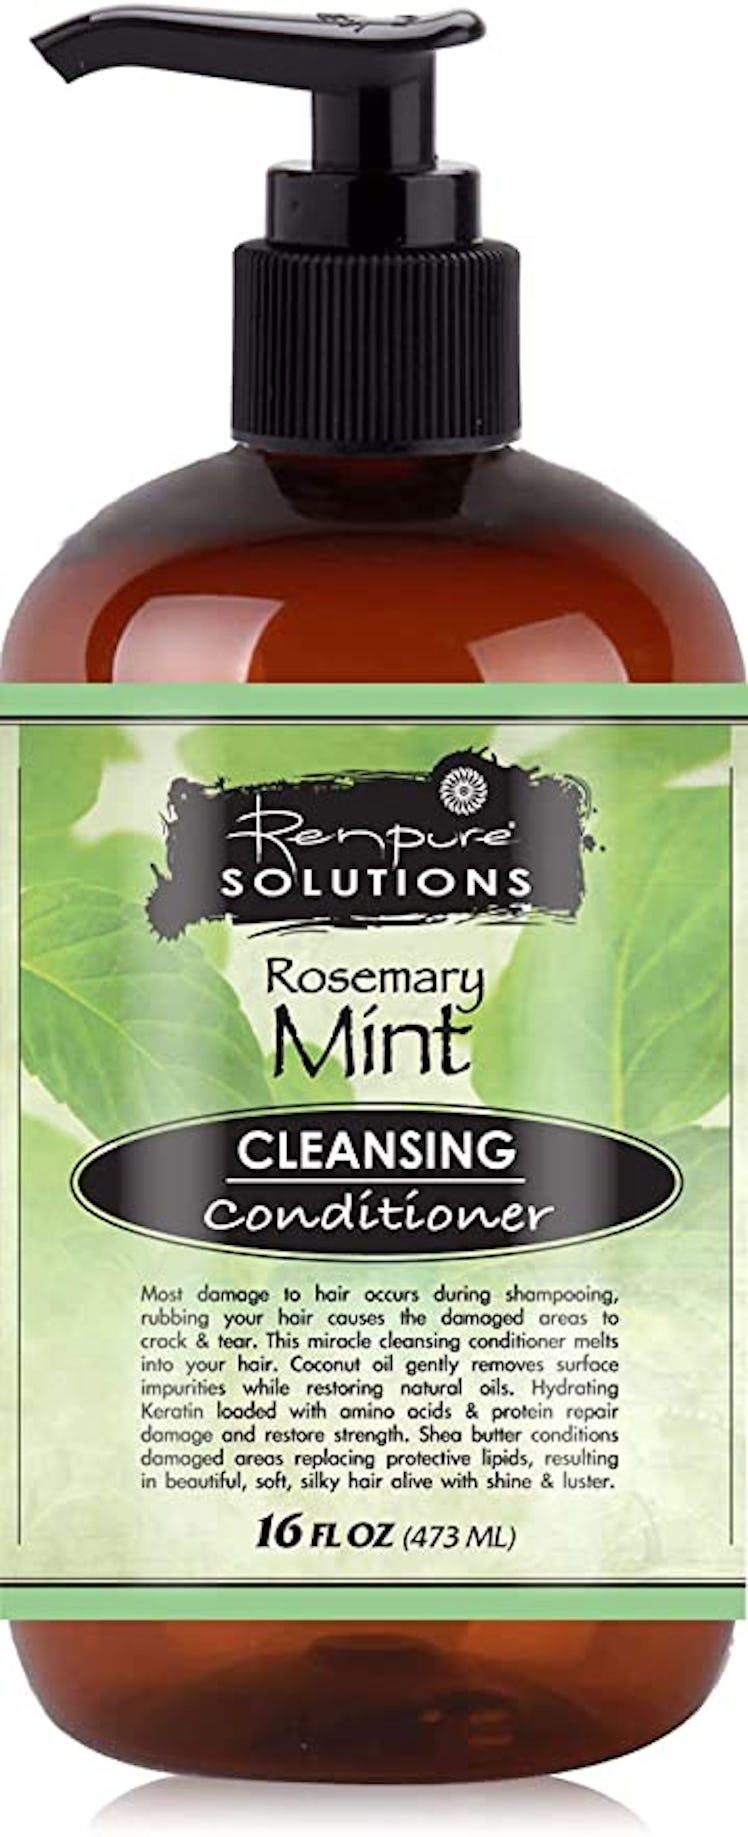 RenPure Solutions Rosemary Mint Cleansing Conditioner